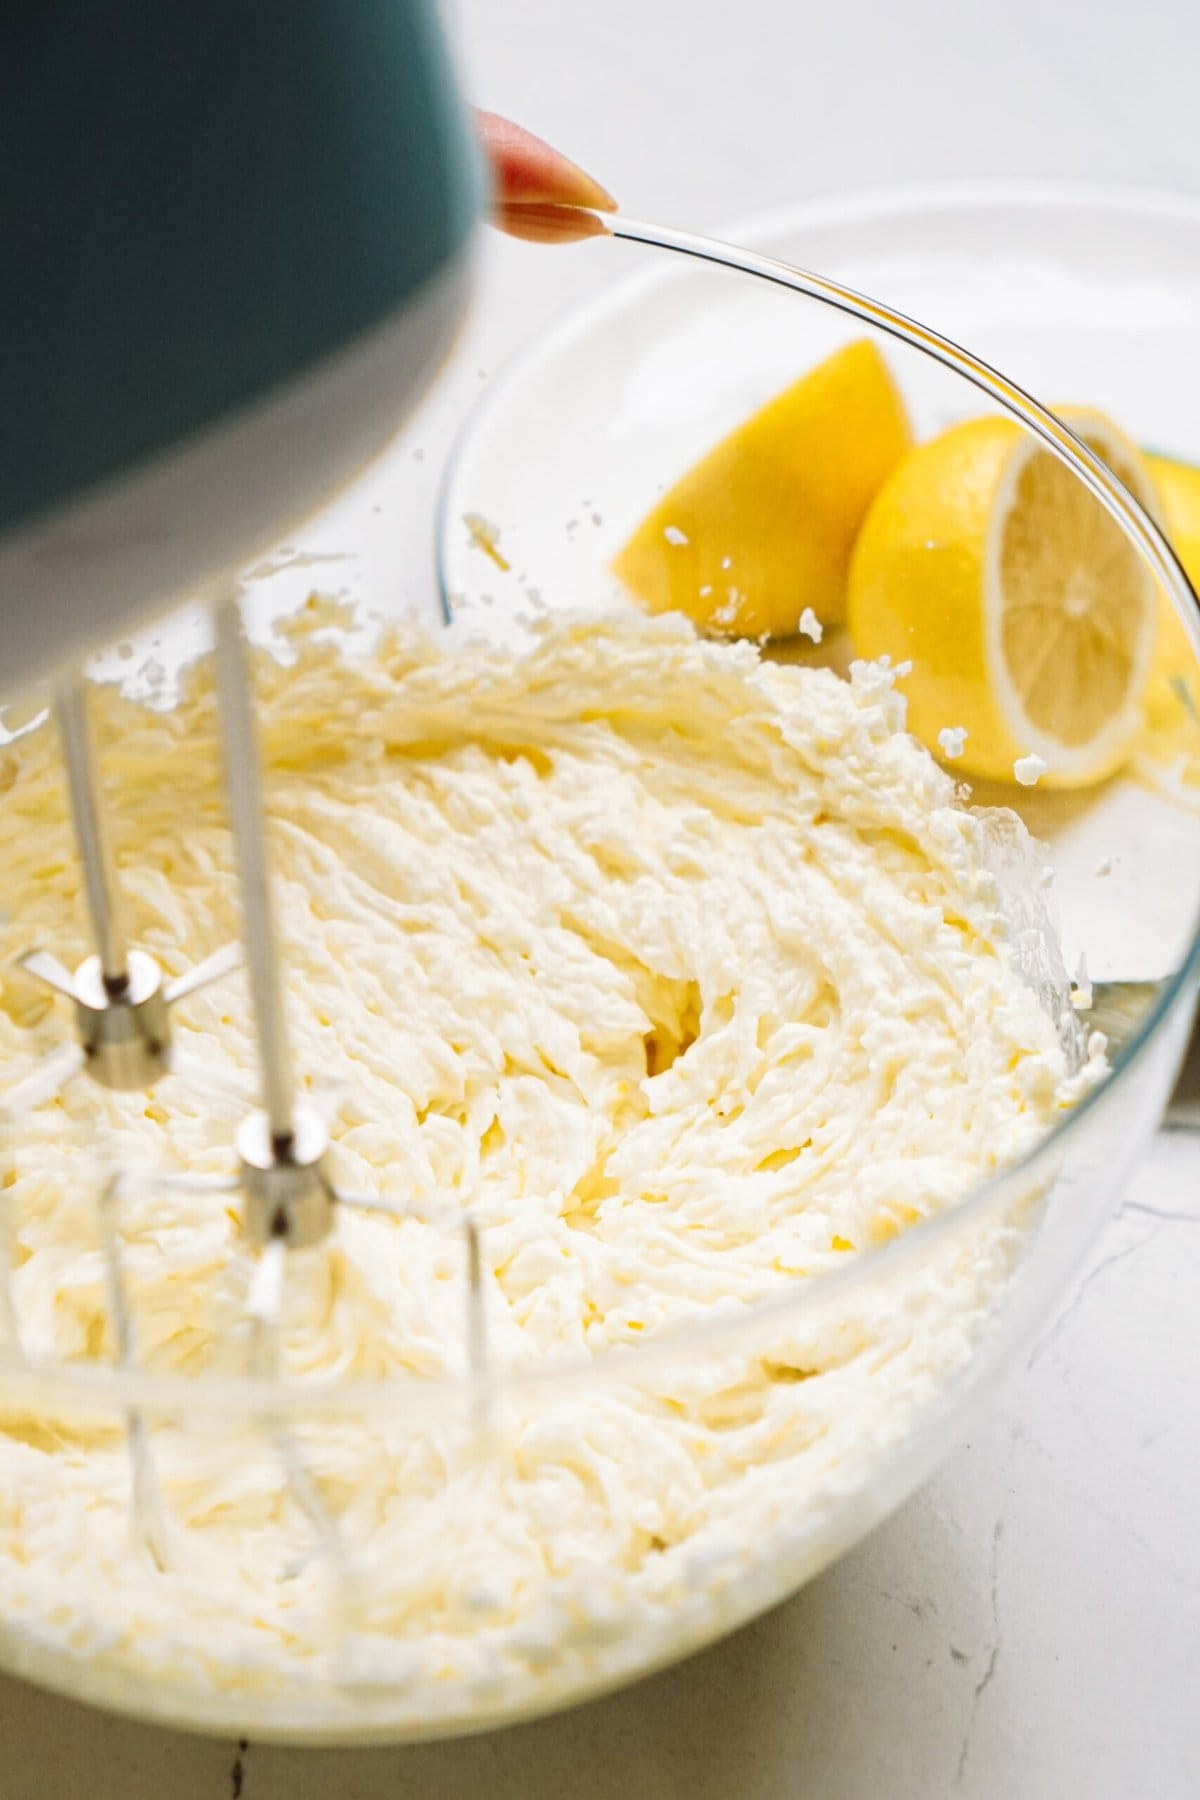 Electric mixer whipping cream in a bowl with cut lemons in the background.